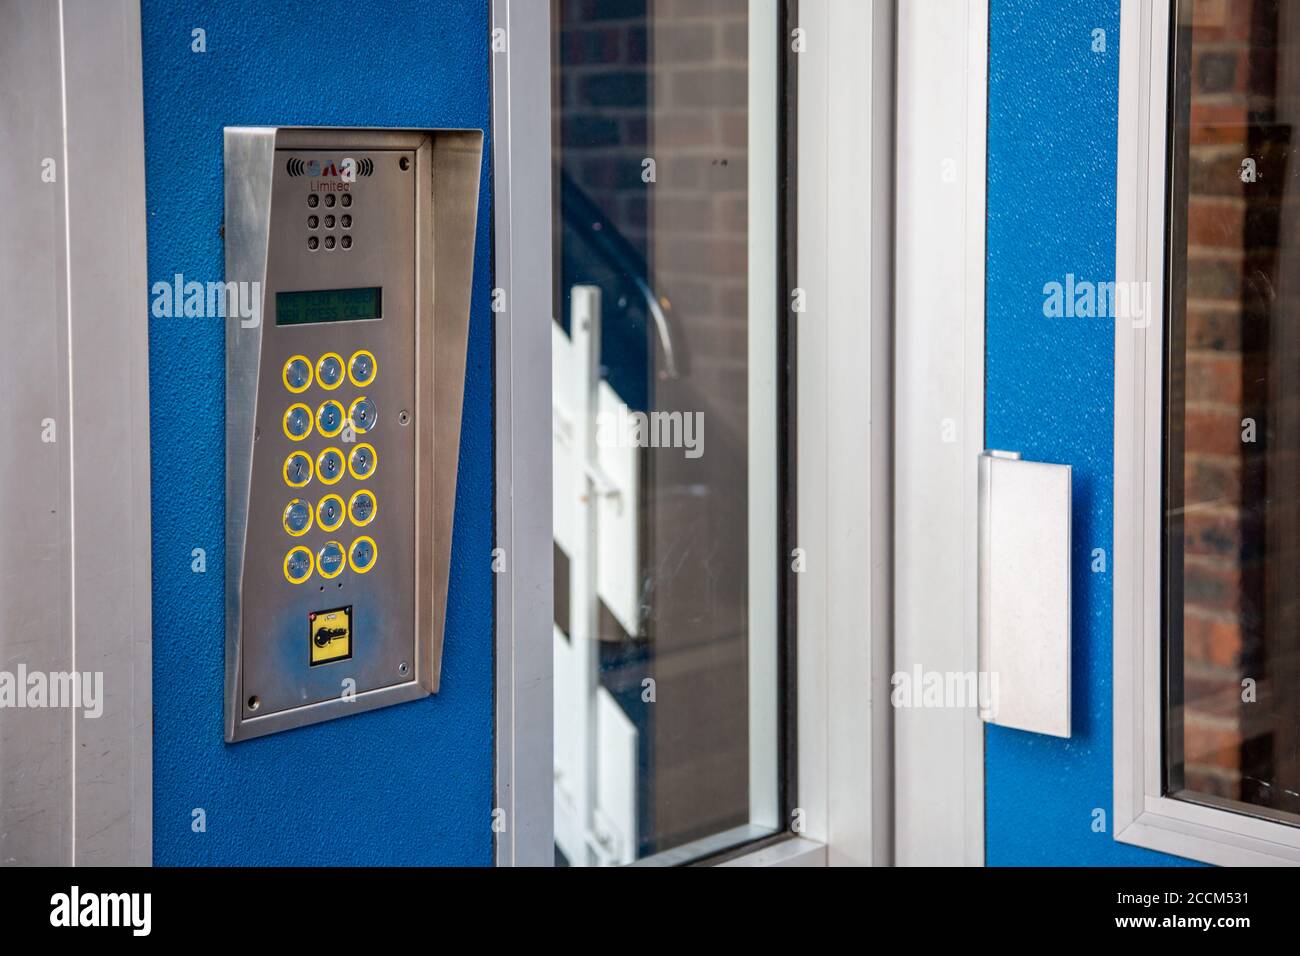 A intercom system on the exterior of a block of flats used for gaining access Stock Photo